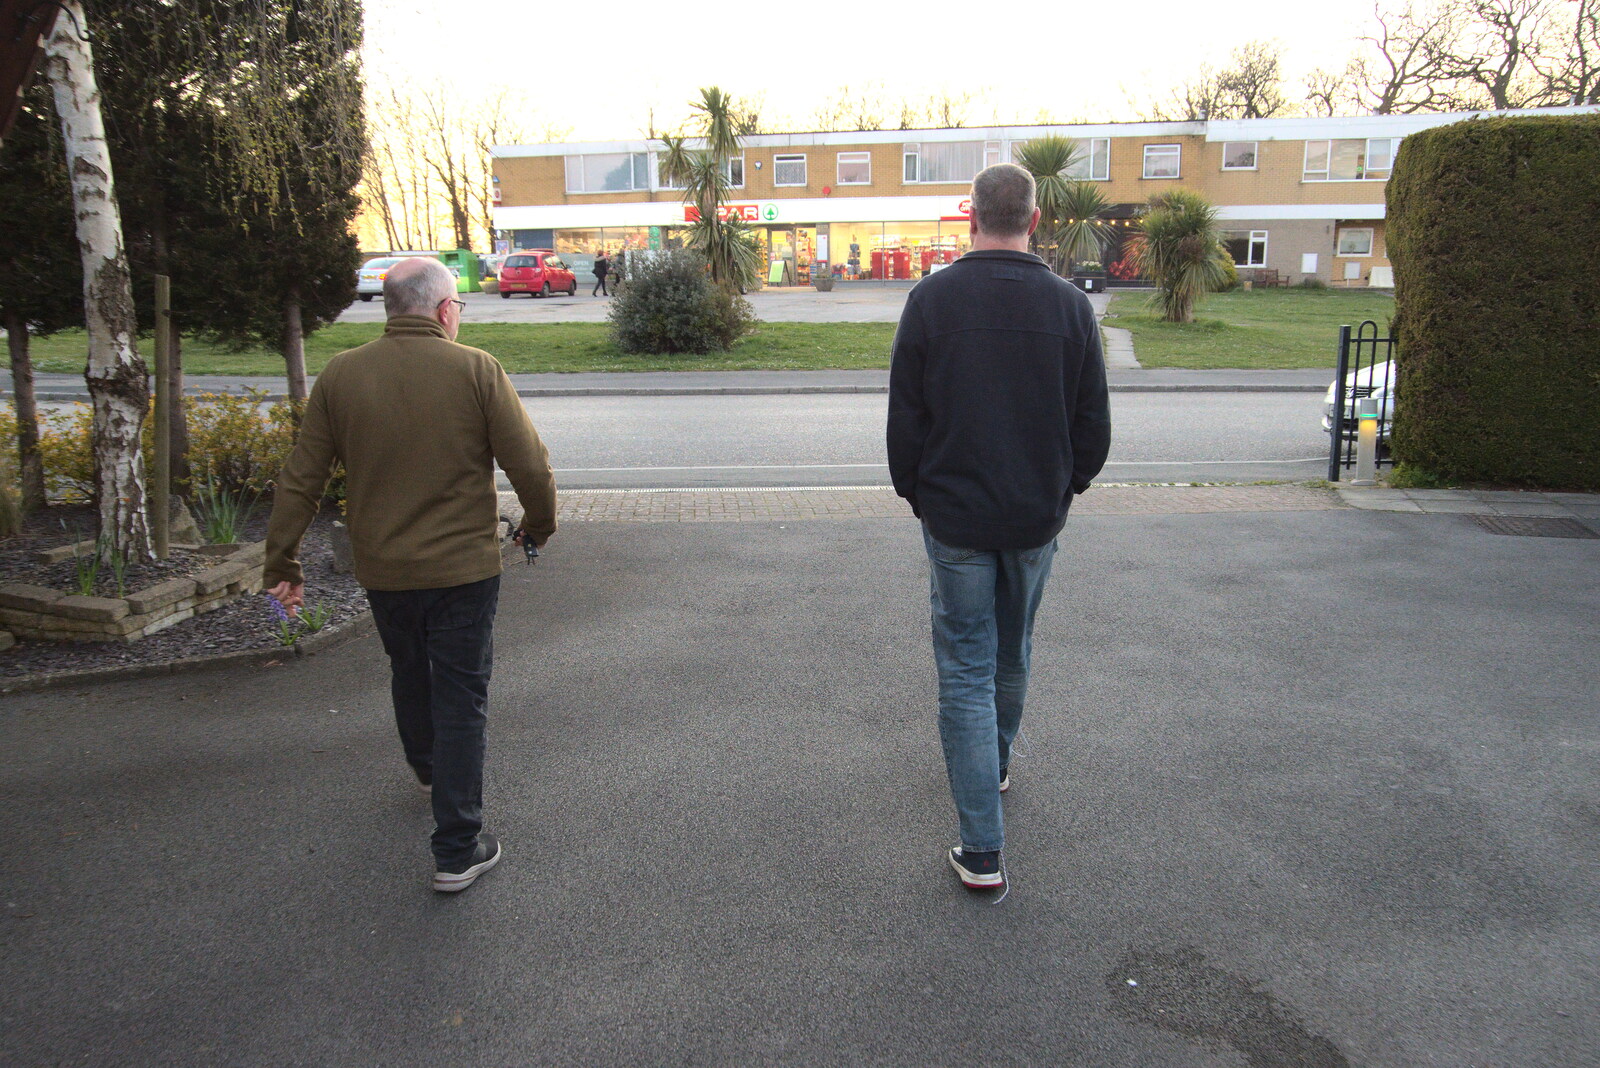 A Trip Down South, New Milton, Hampshire - 9th April 2022: Hamish and Sean stride around